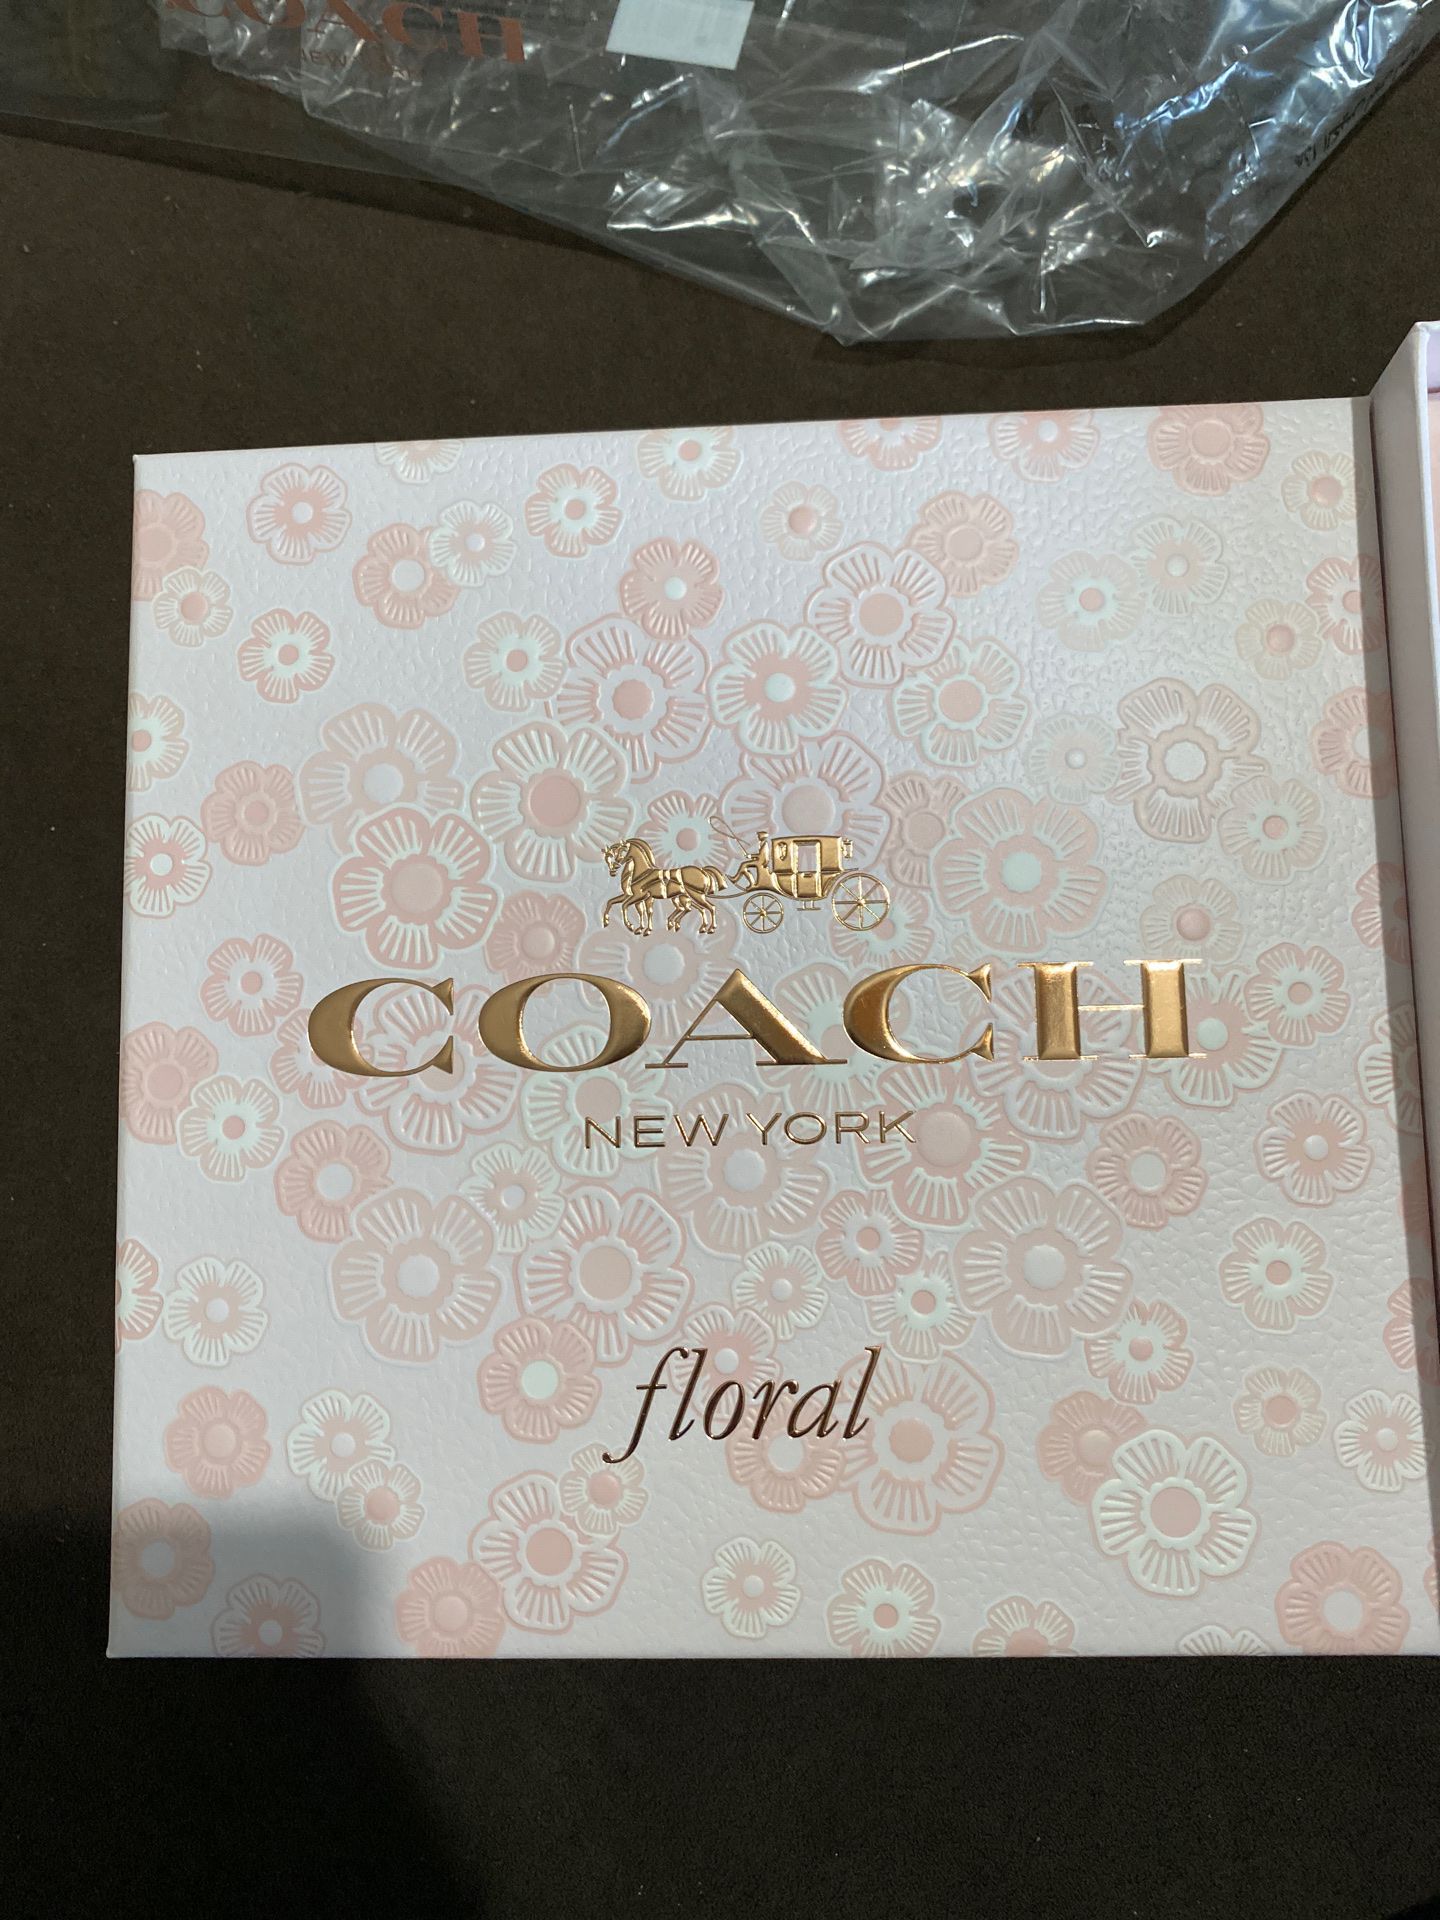 COACH New York Floral